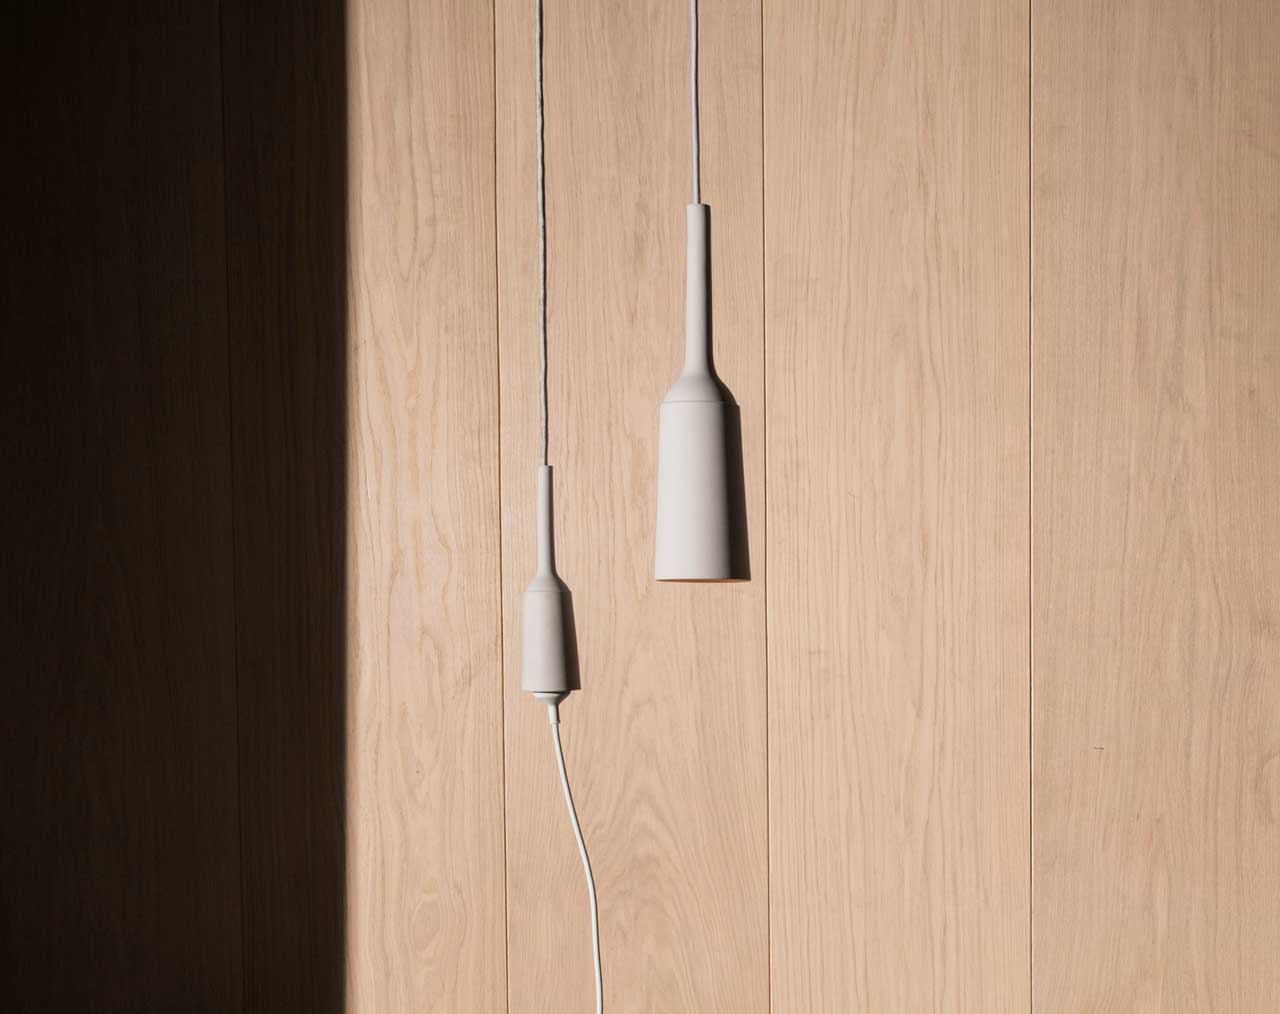 The Douwes Pendant&Socket Proves Sockets Don't Have to Be Hidden